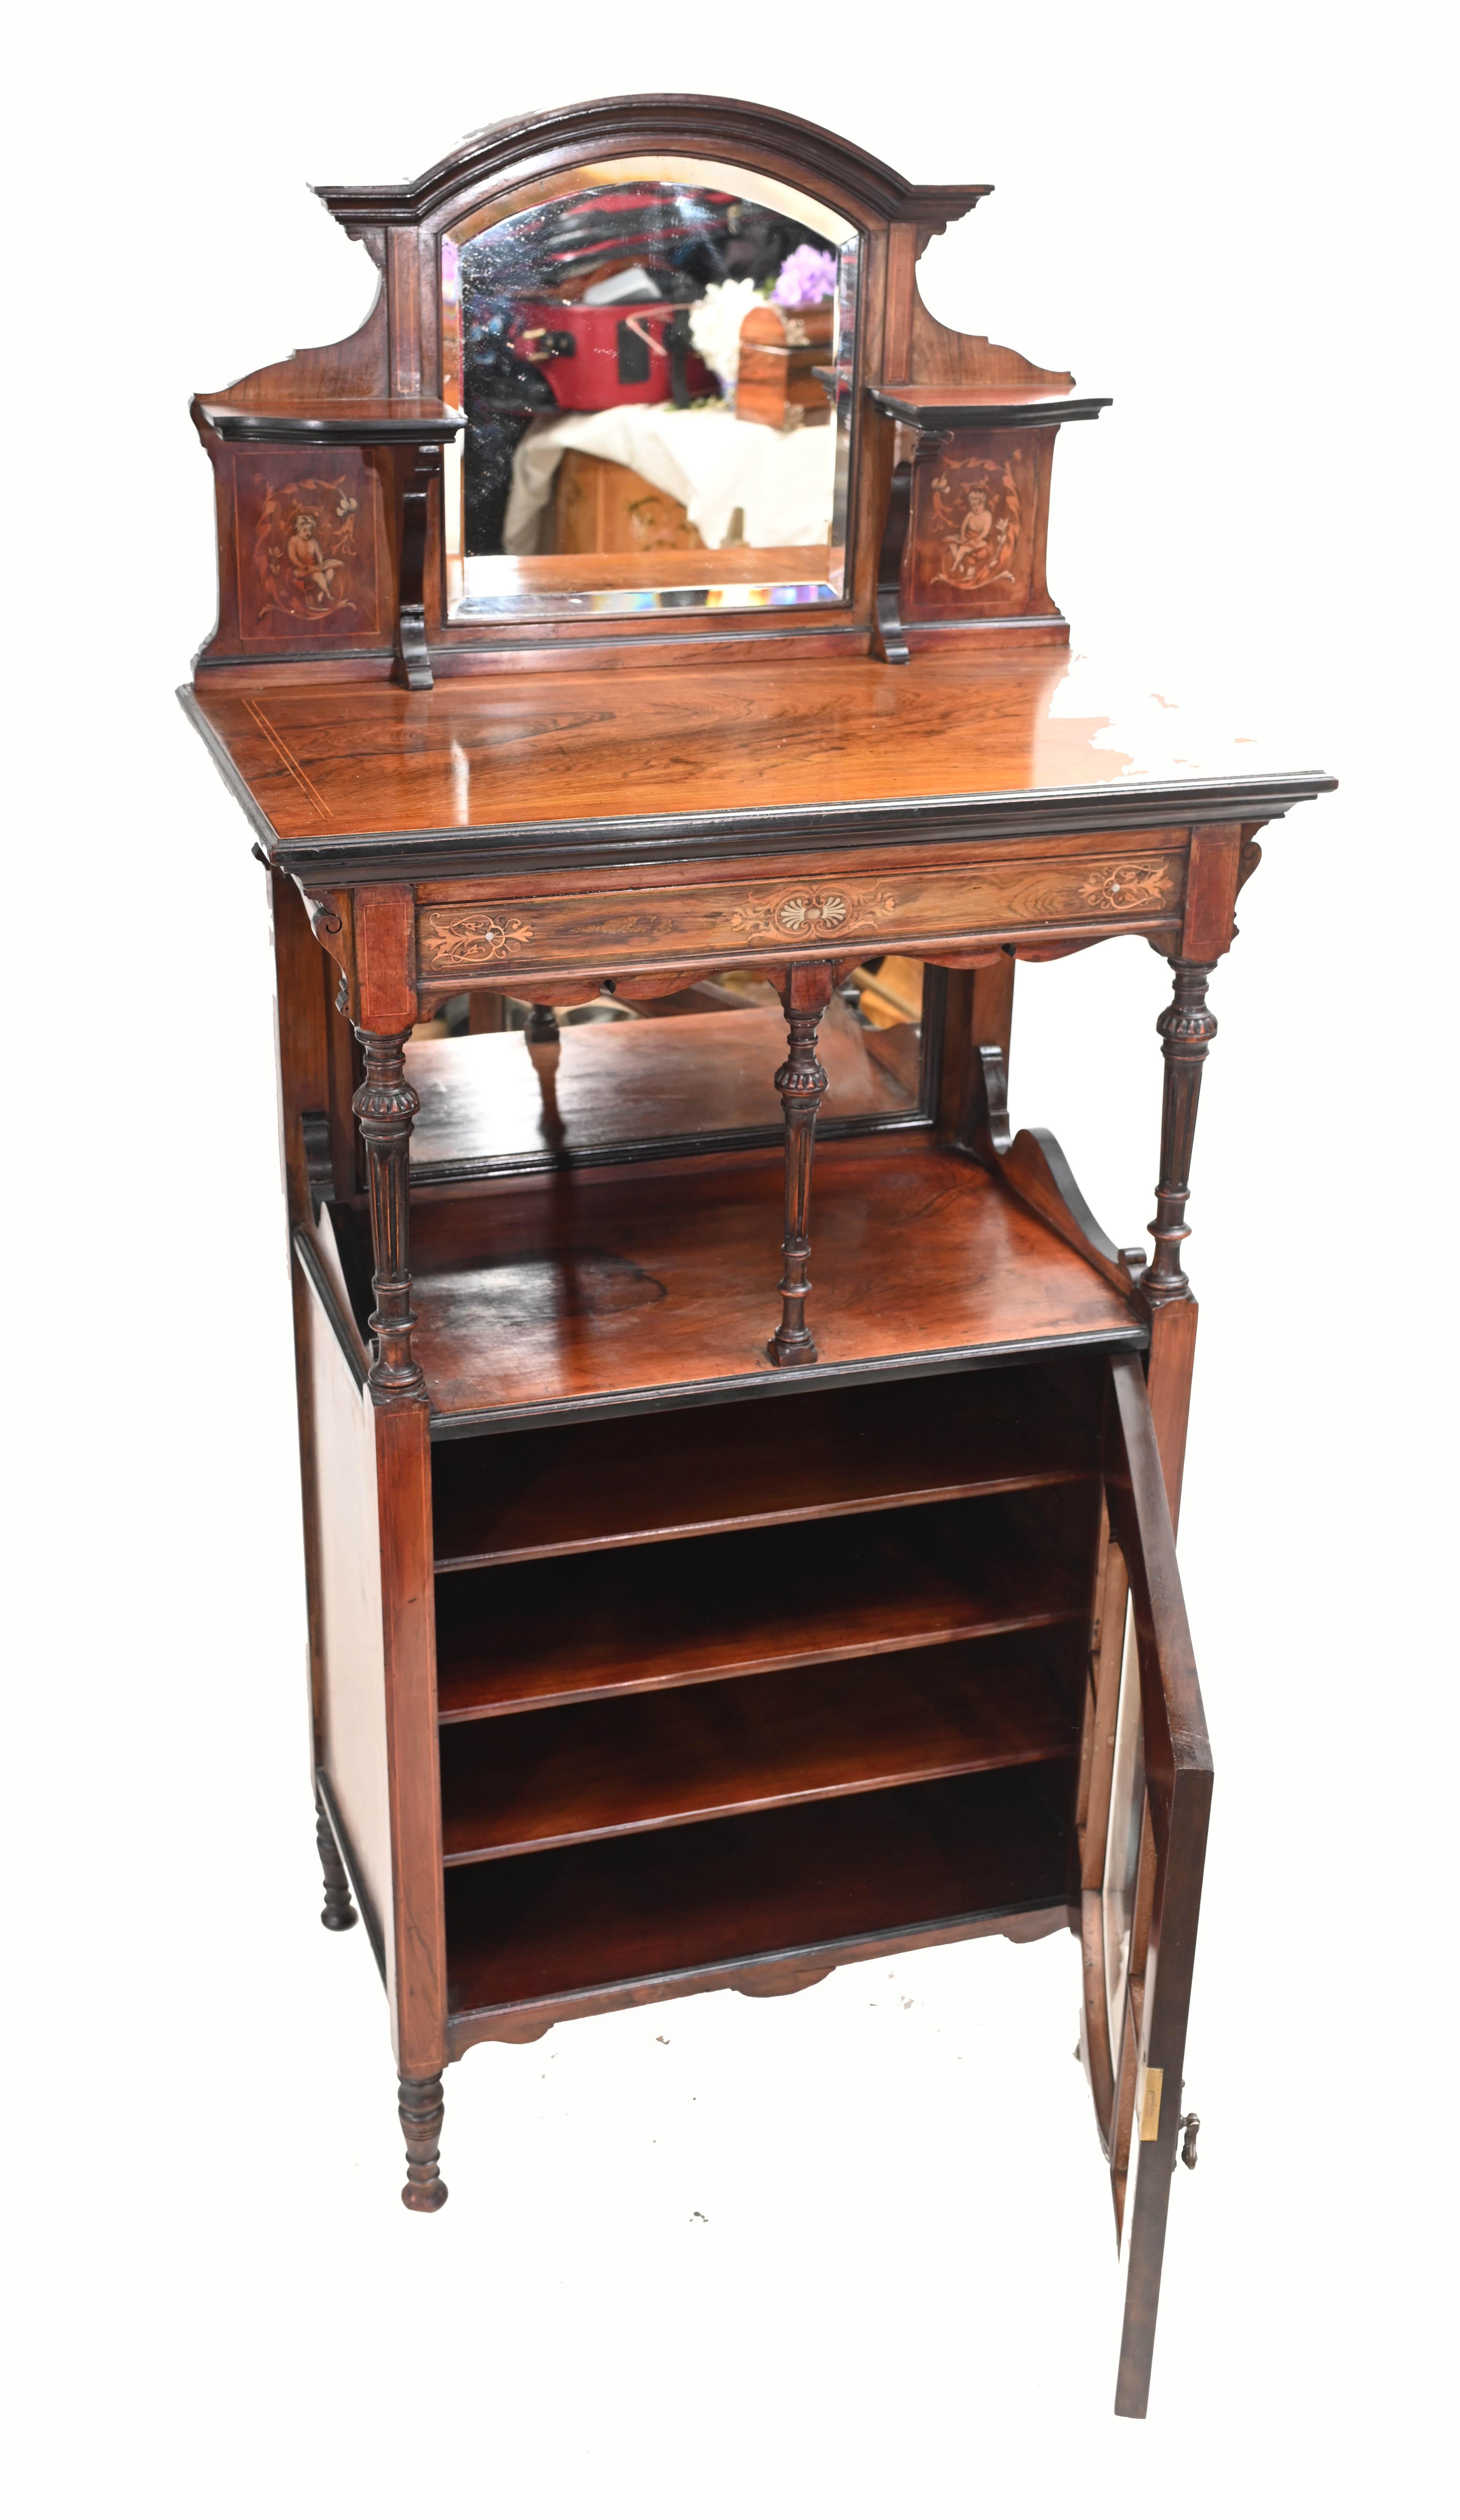 Elegant Edwardian music cabinet in rosewood 
We date this to circa 1910 
Features intricate marquetry inlay work including distinctive cherub panels 
Some of our items are in storage so please check ahead of a viewing to see if it is on our shop